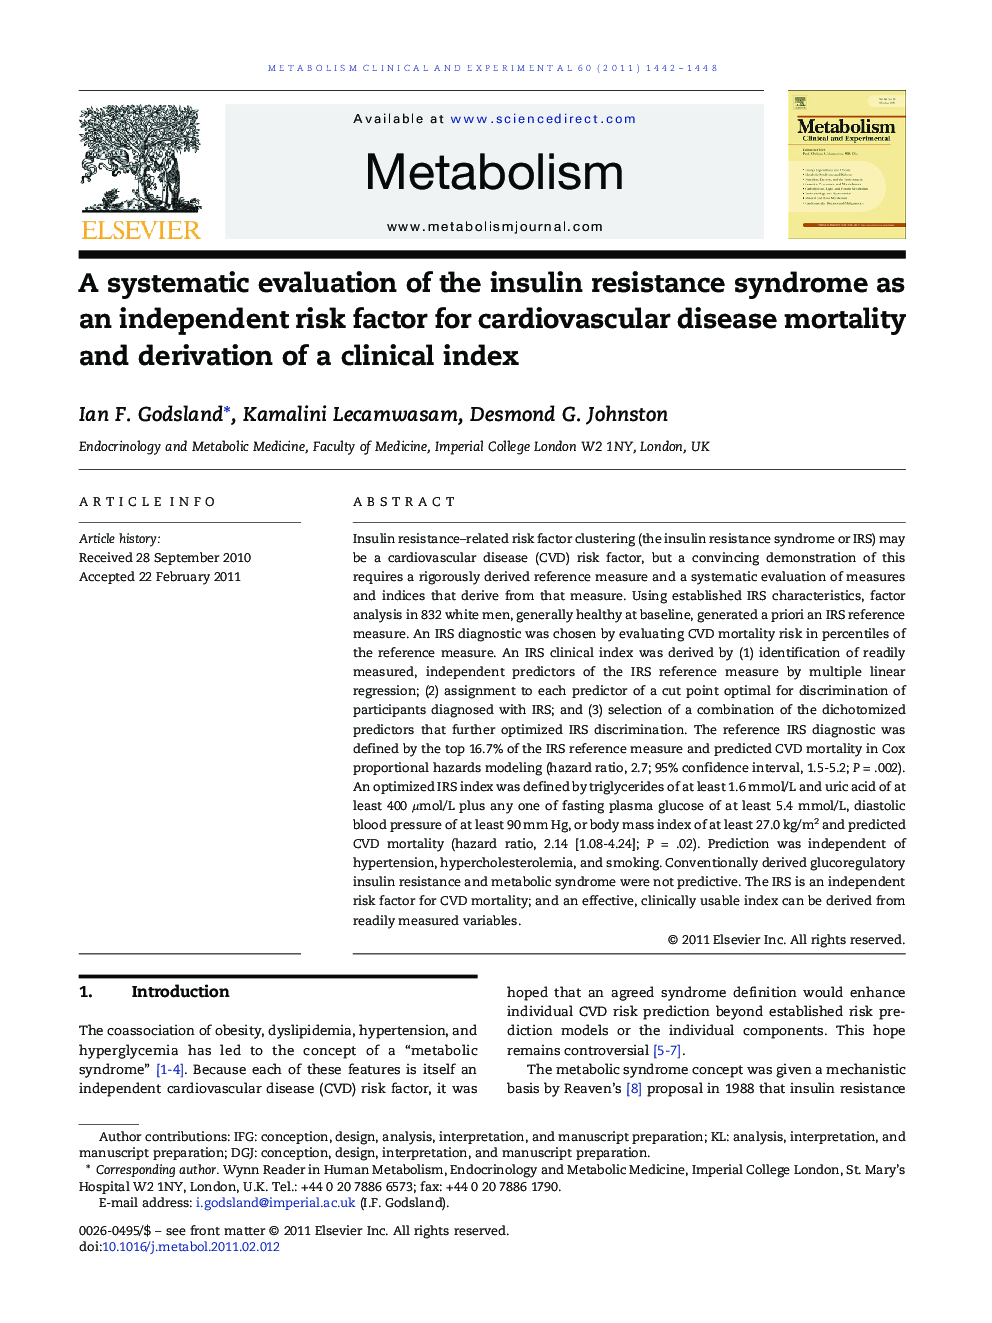 A systematic evaluation of the insulin resistance syndrome as an independent risk factor for cardiovascular disease mortality and derivation of a clinical index